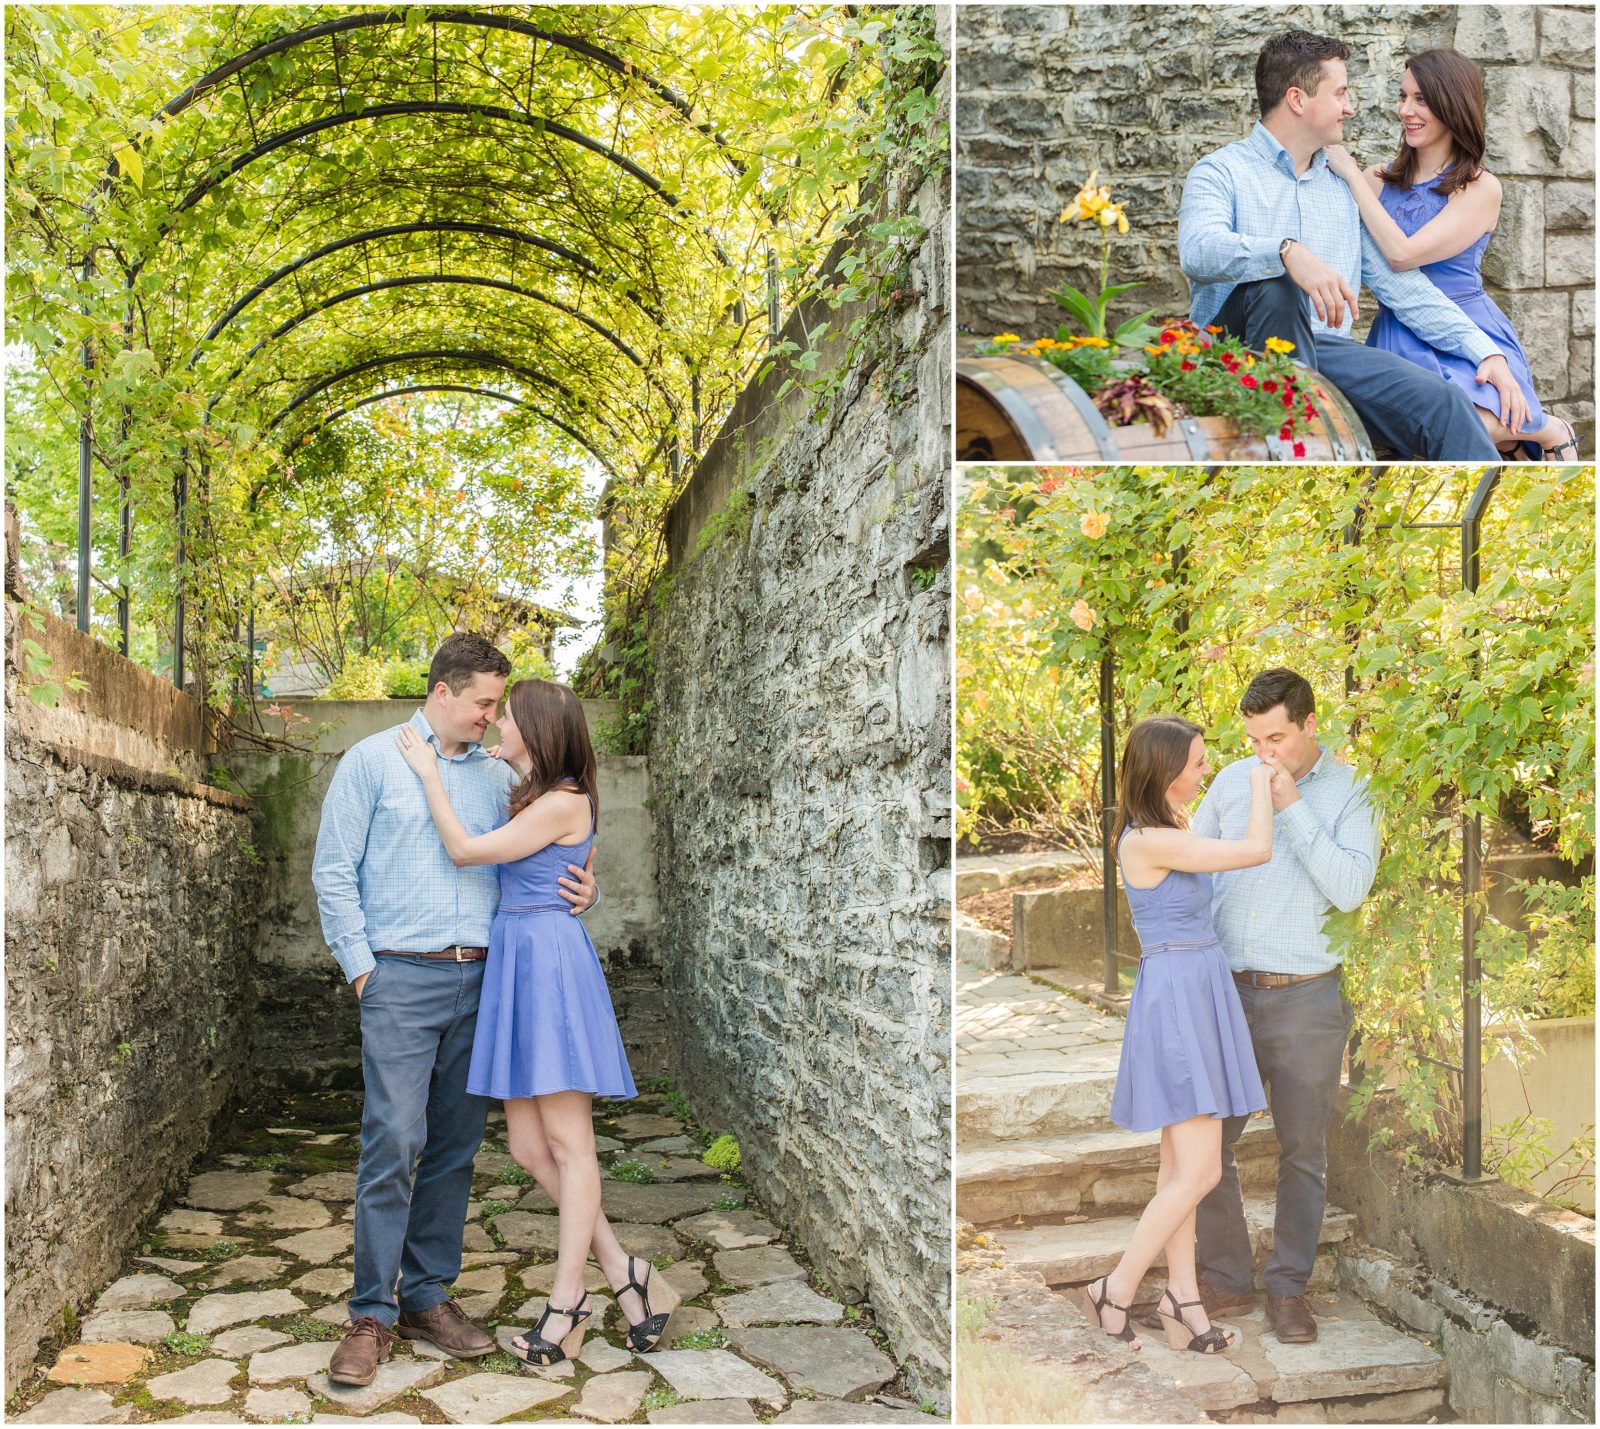 Engagement Session in the garden at Buffalo Trace Distillery